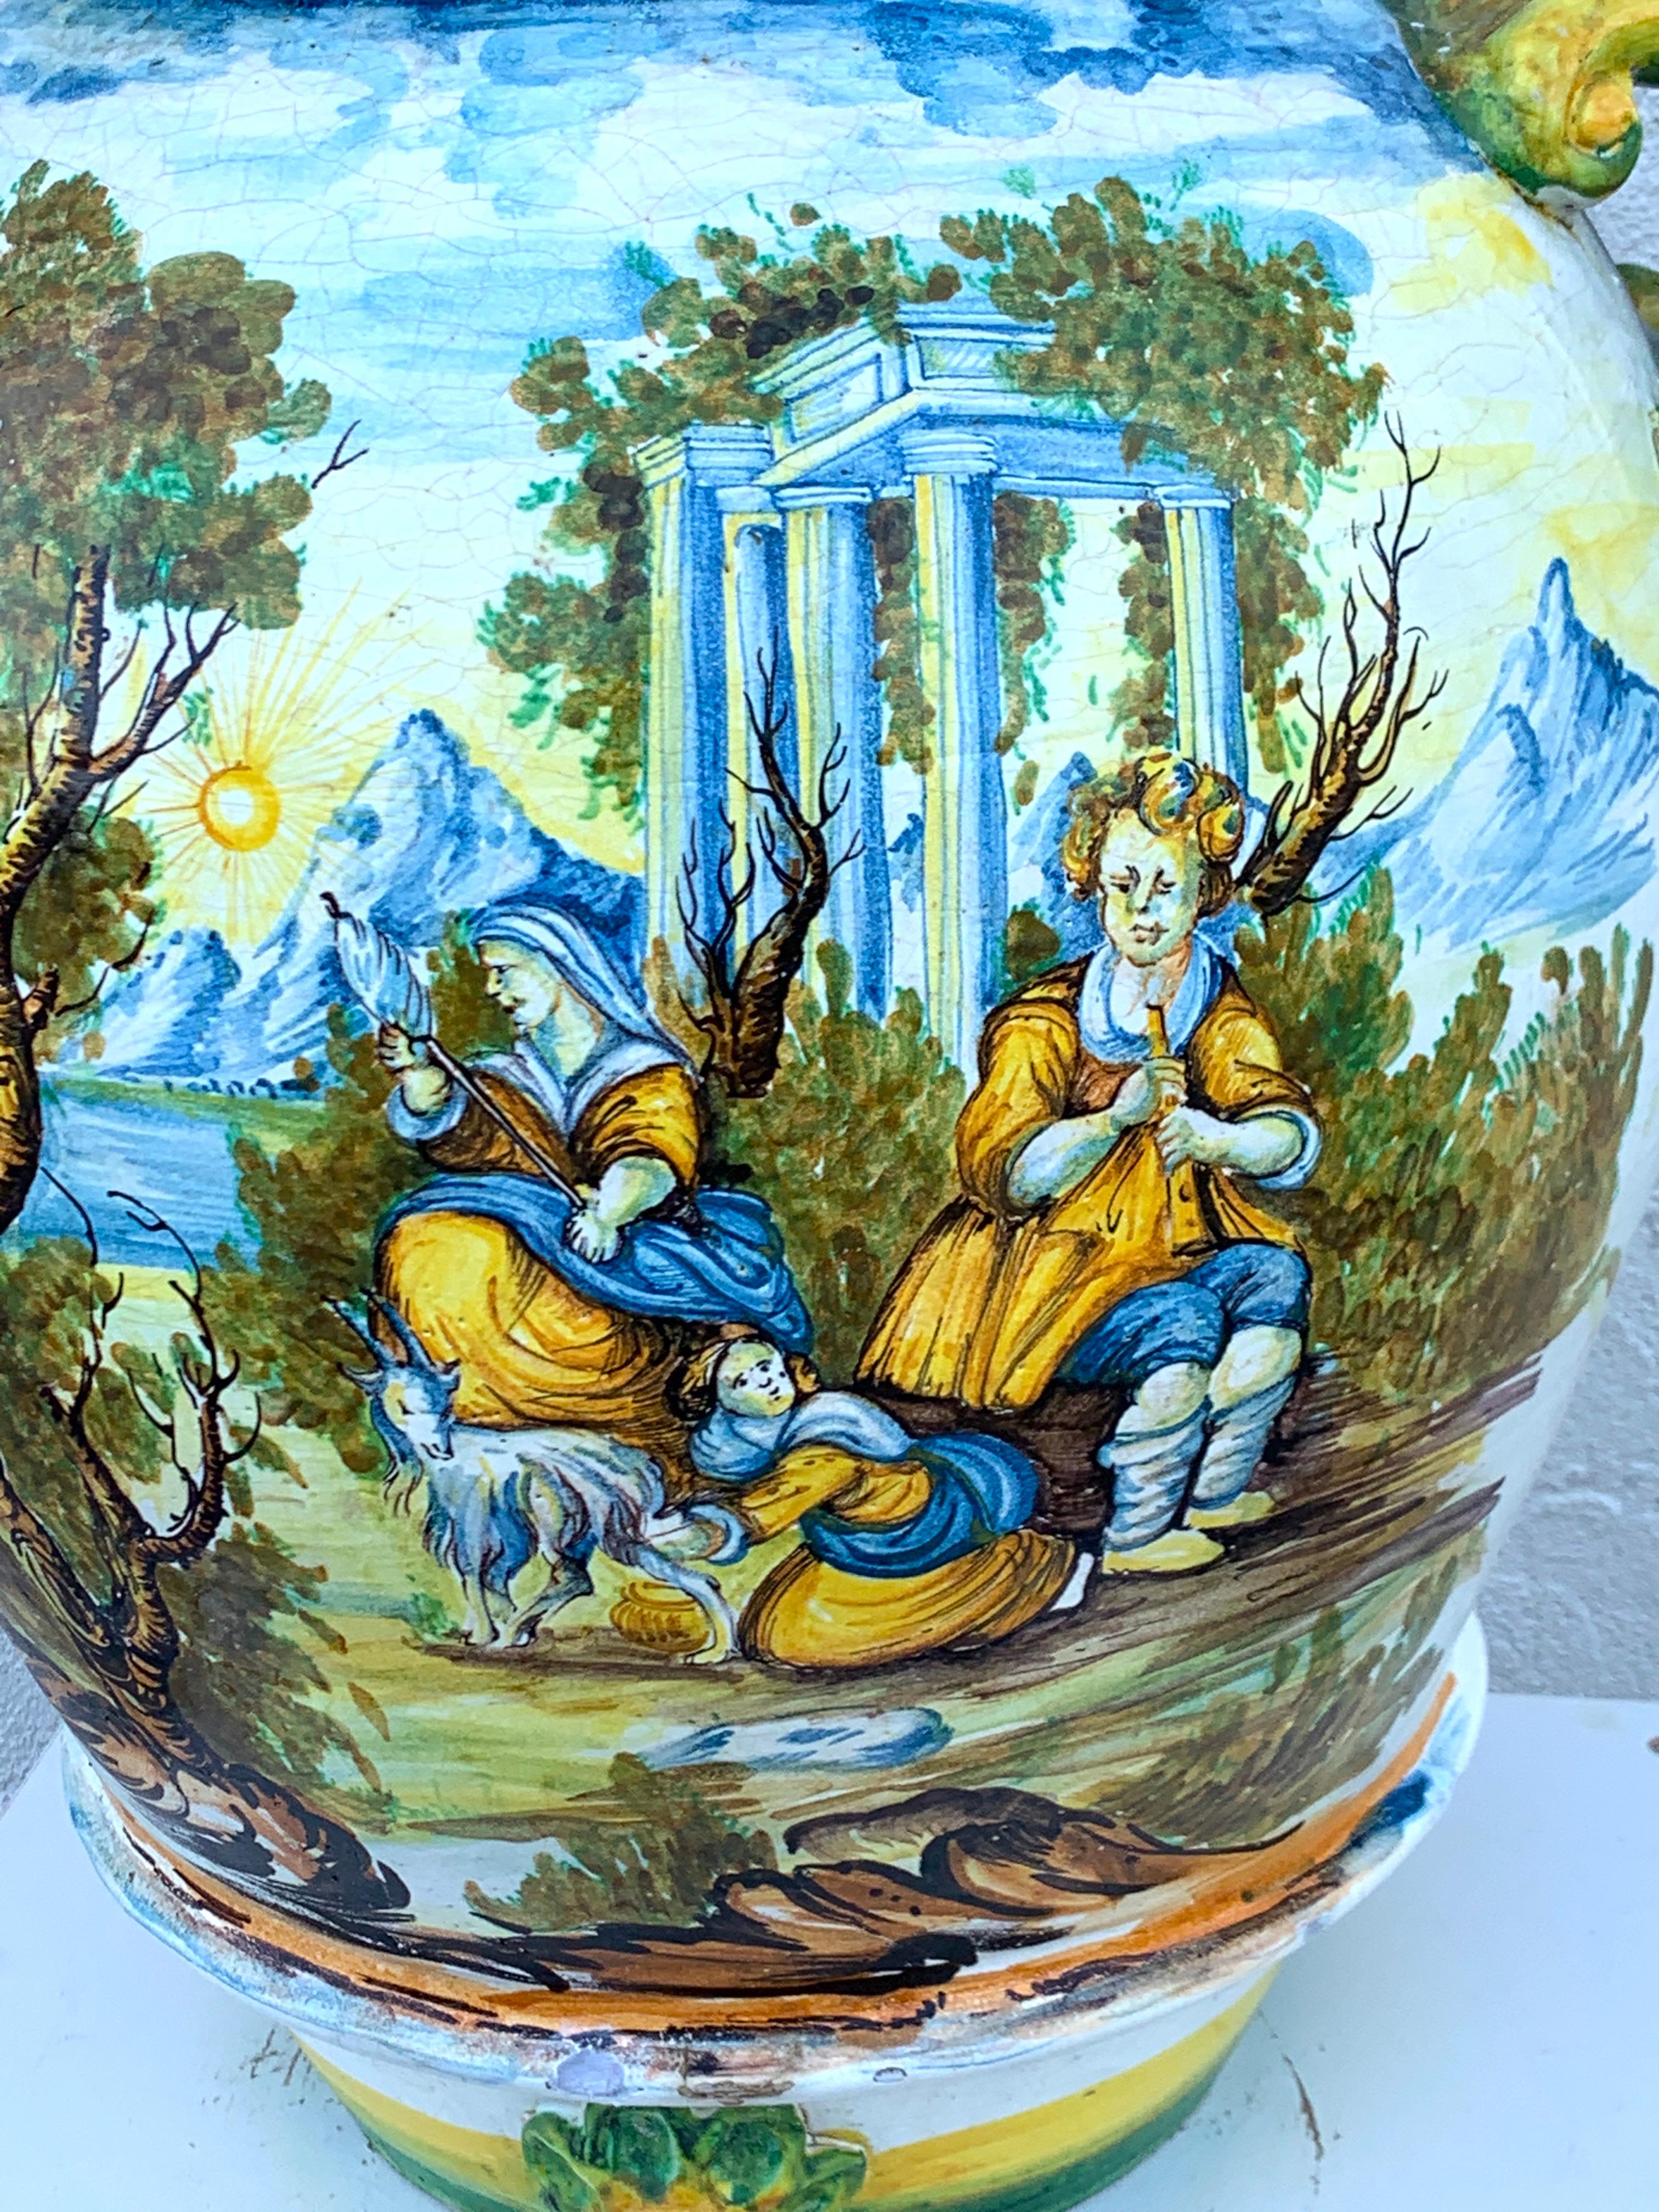 Italian Majolica scenic olive oil jar/ jardinière, Provenance: Celine Dion
Profusely decorated with a Renaissance style landscape, Can be used indoors or outdoors
Provenance: Celine Dion's Jupiter Florida Estate.
